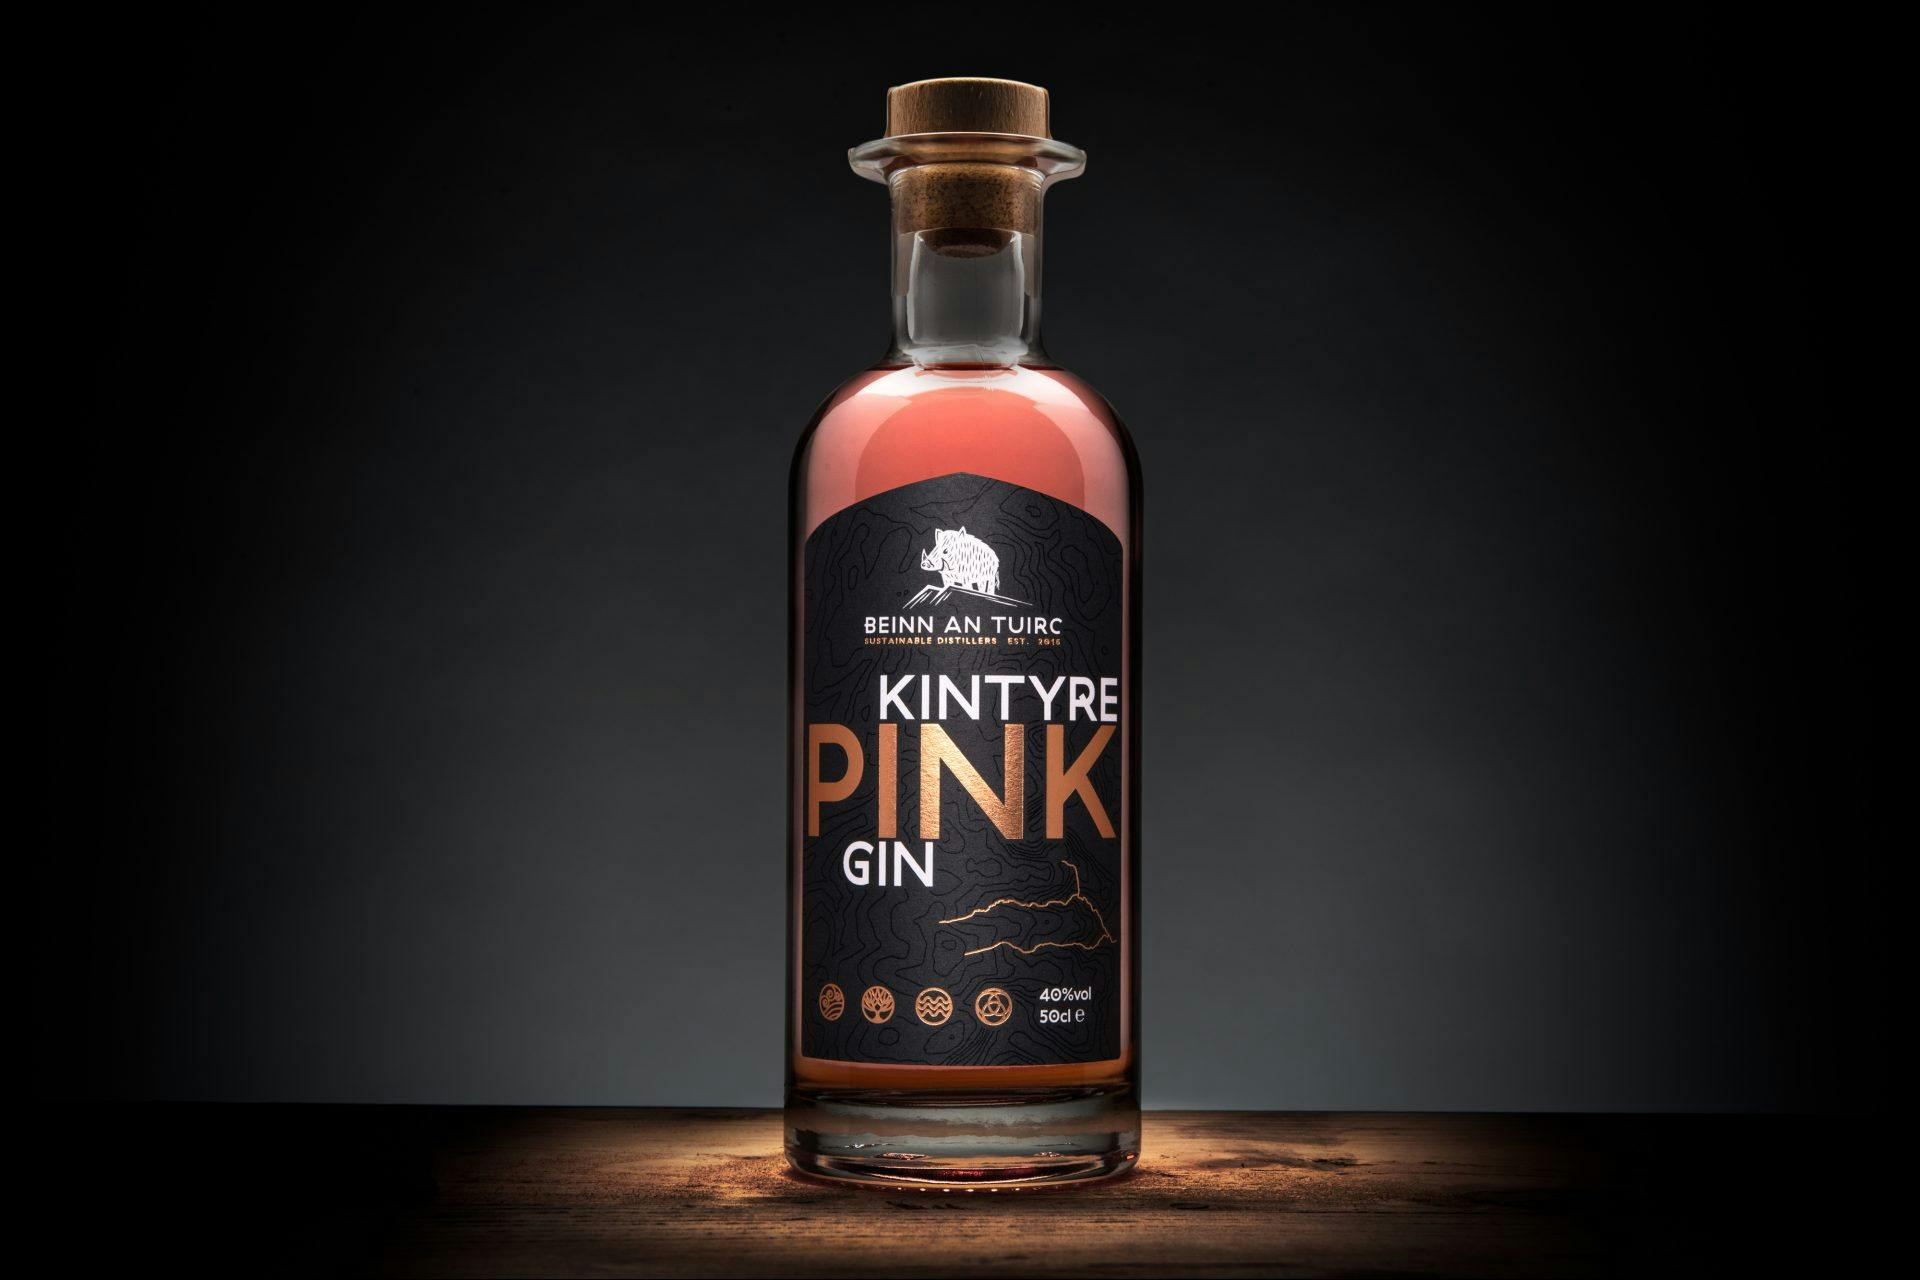 Image of Beinn an Tuirc Kintyre Pink Gin